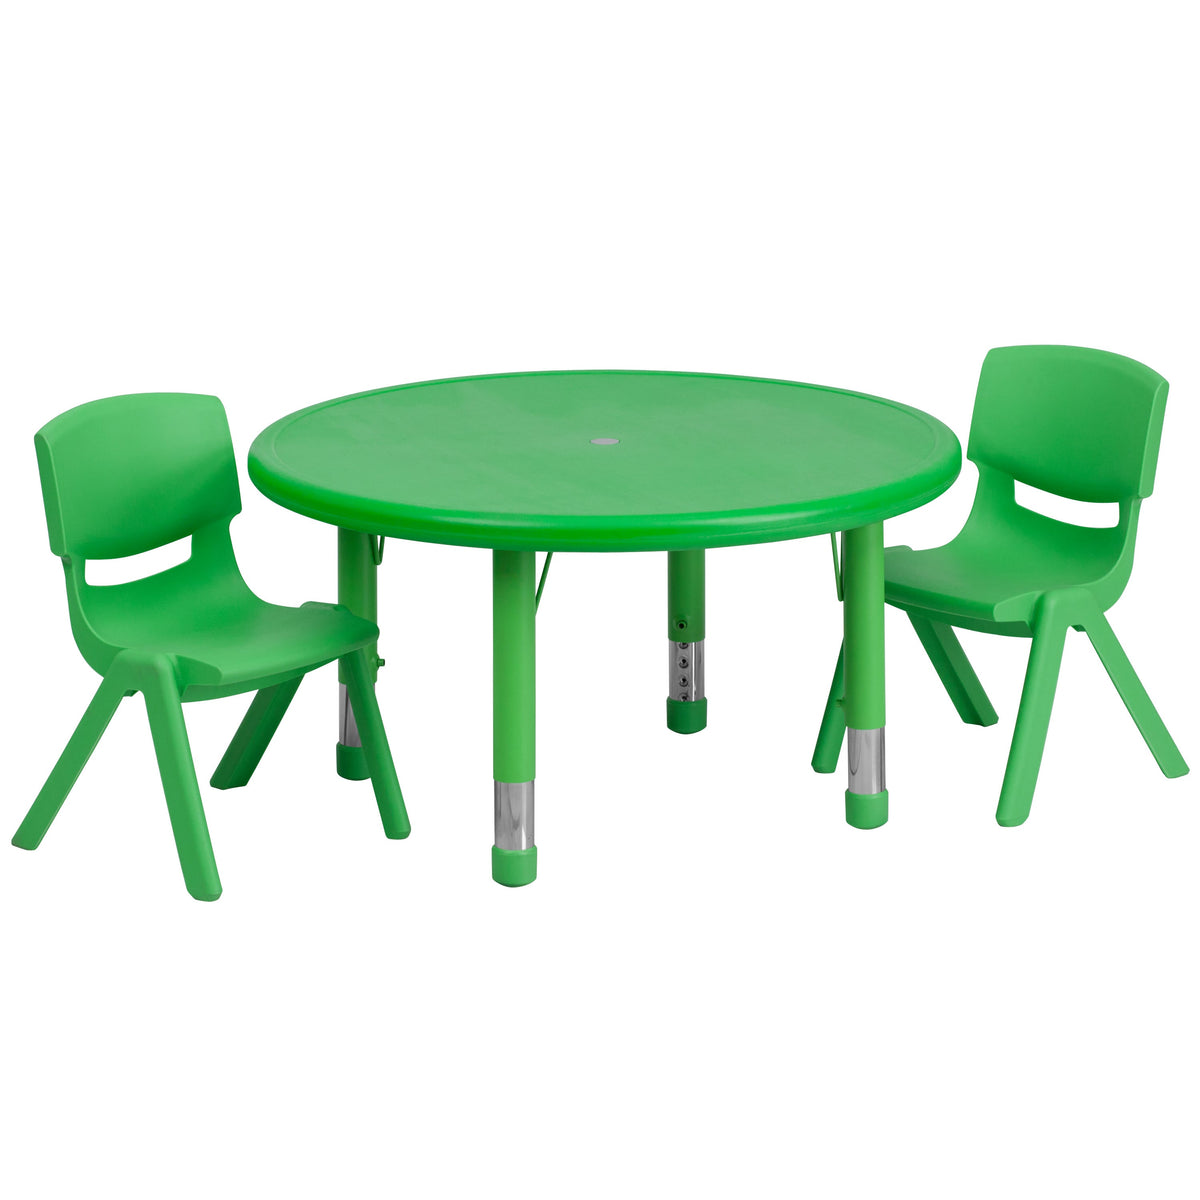 Green |#| 33inch Round Green Plastic Height Adjustable Activity Table Set with 2 Chairs